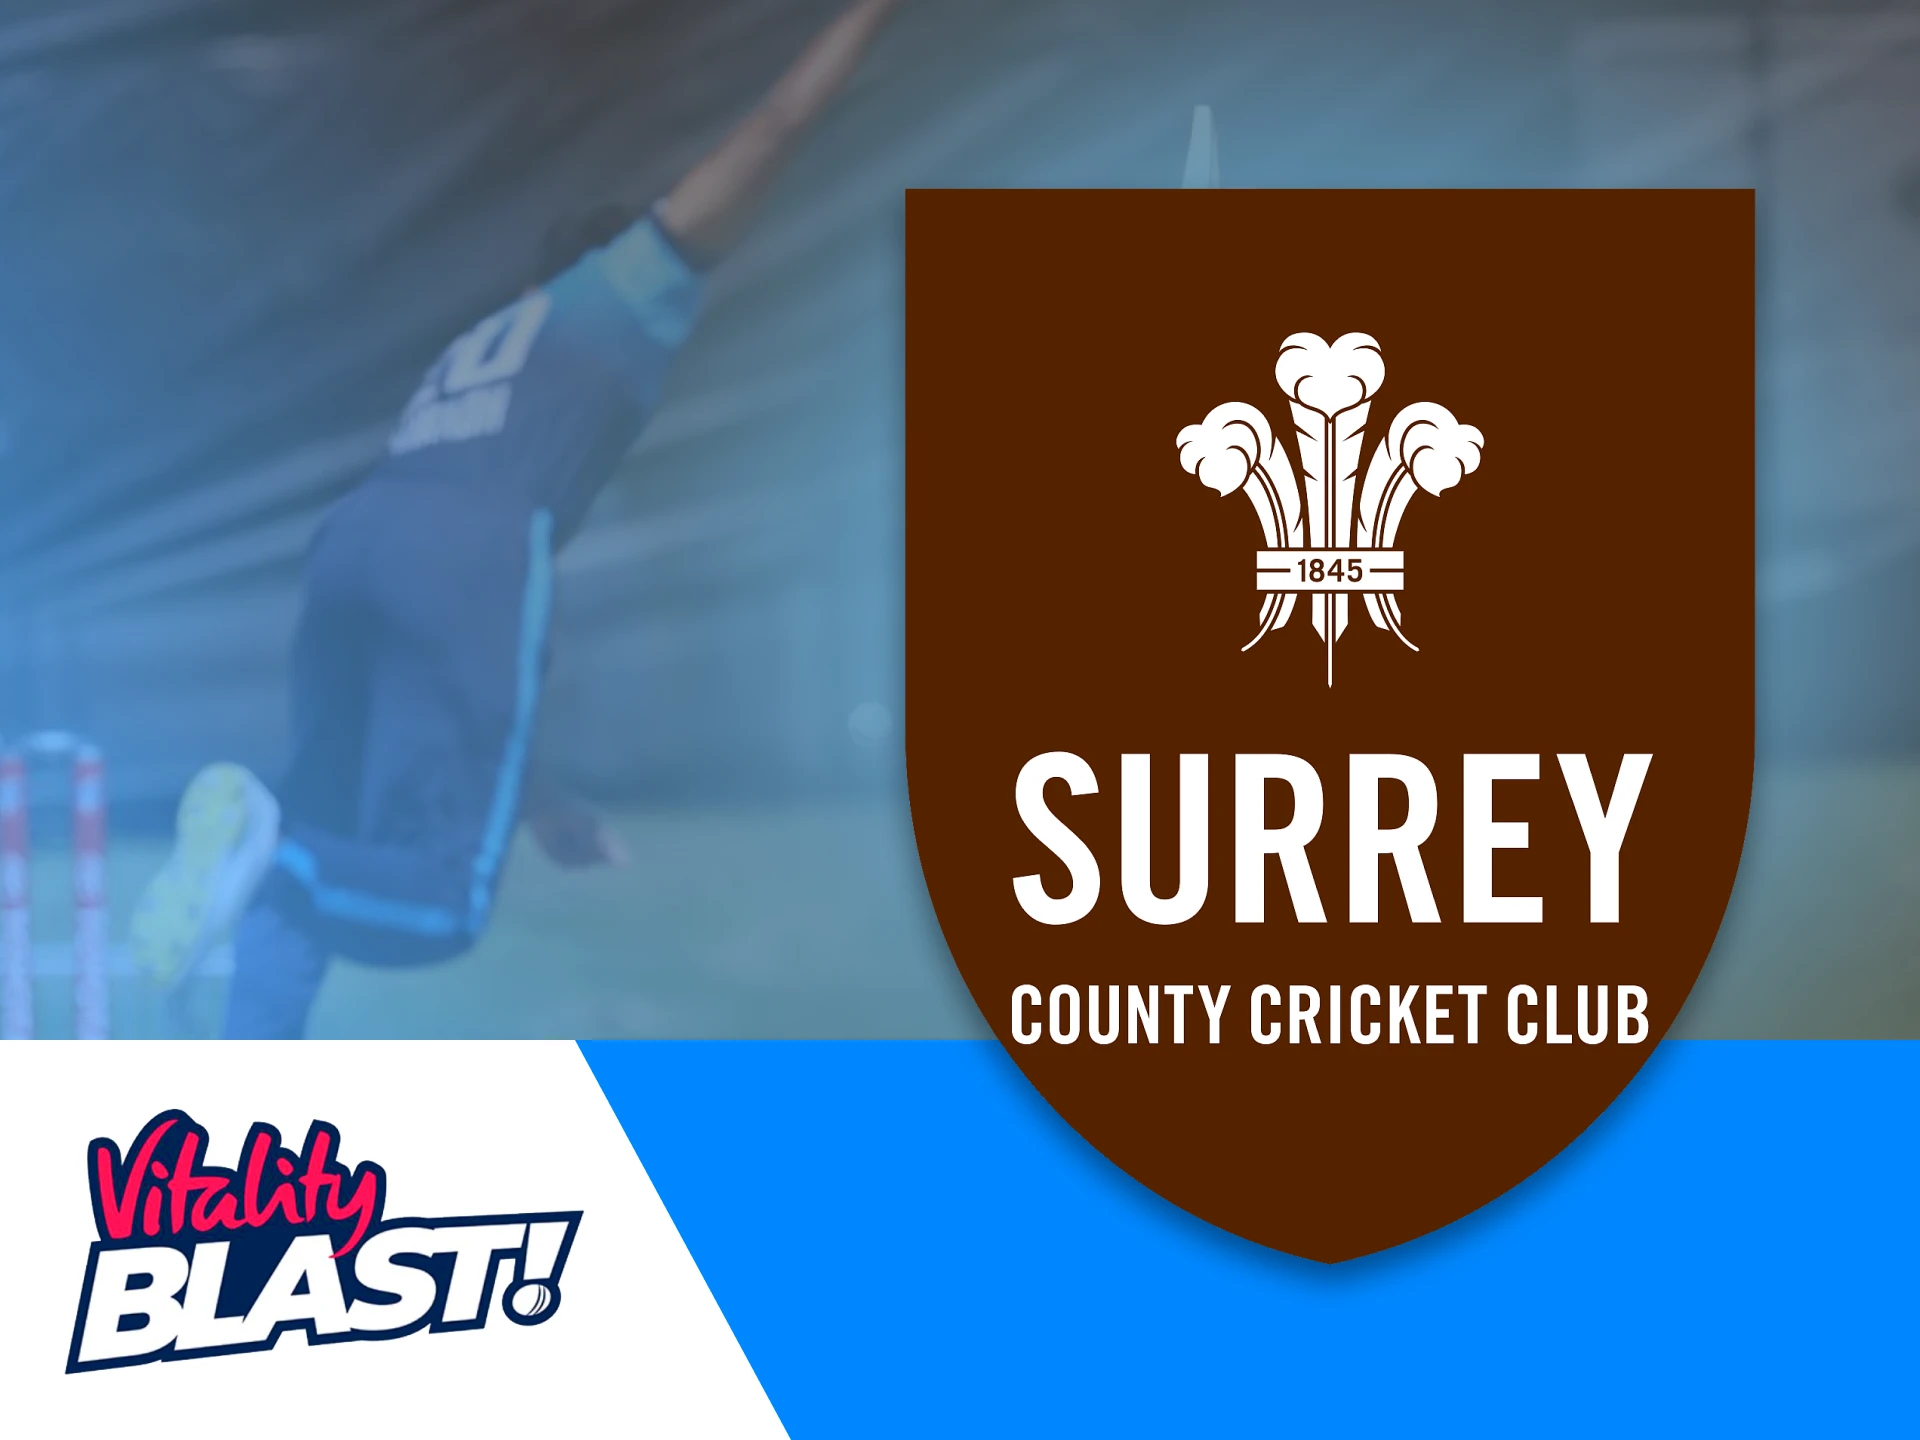 The Surrey Club is the official representative of South London, namely the ancient county of Surrey.